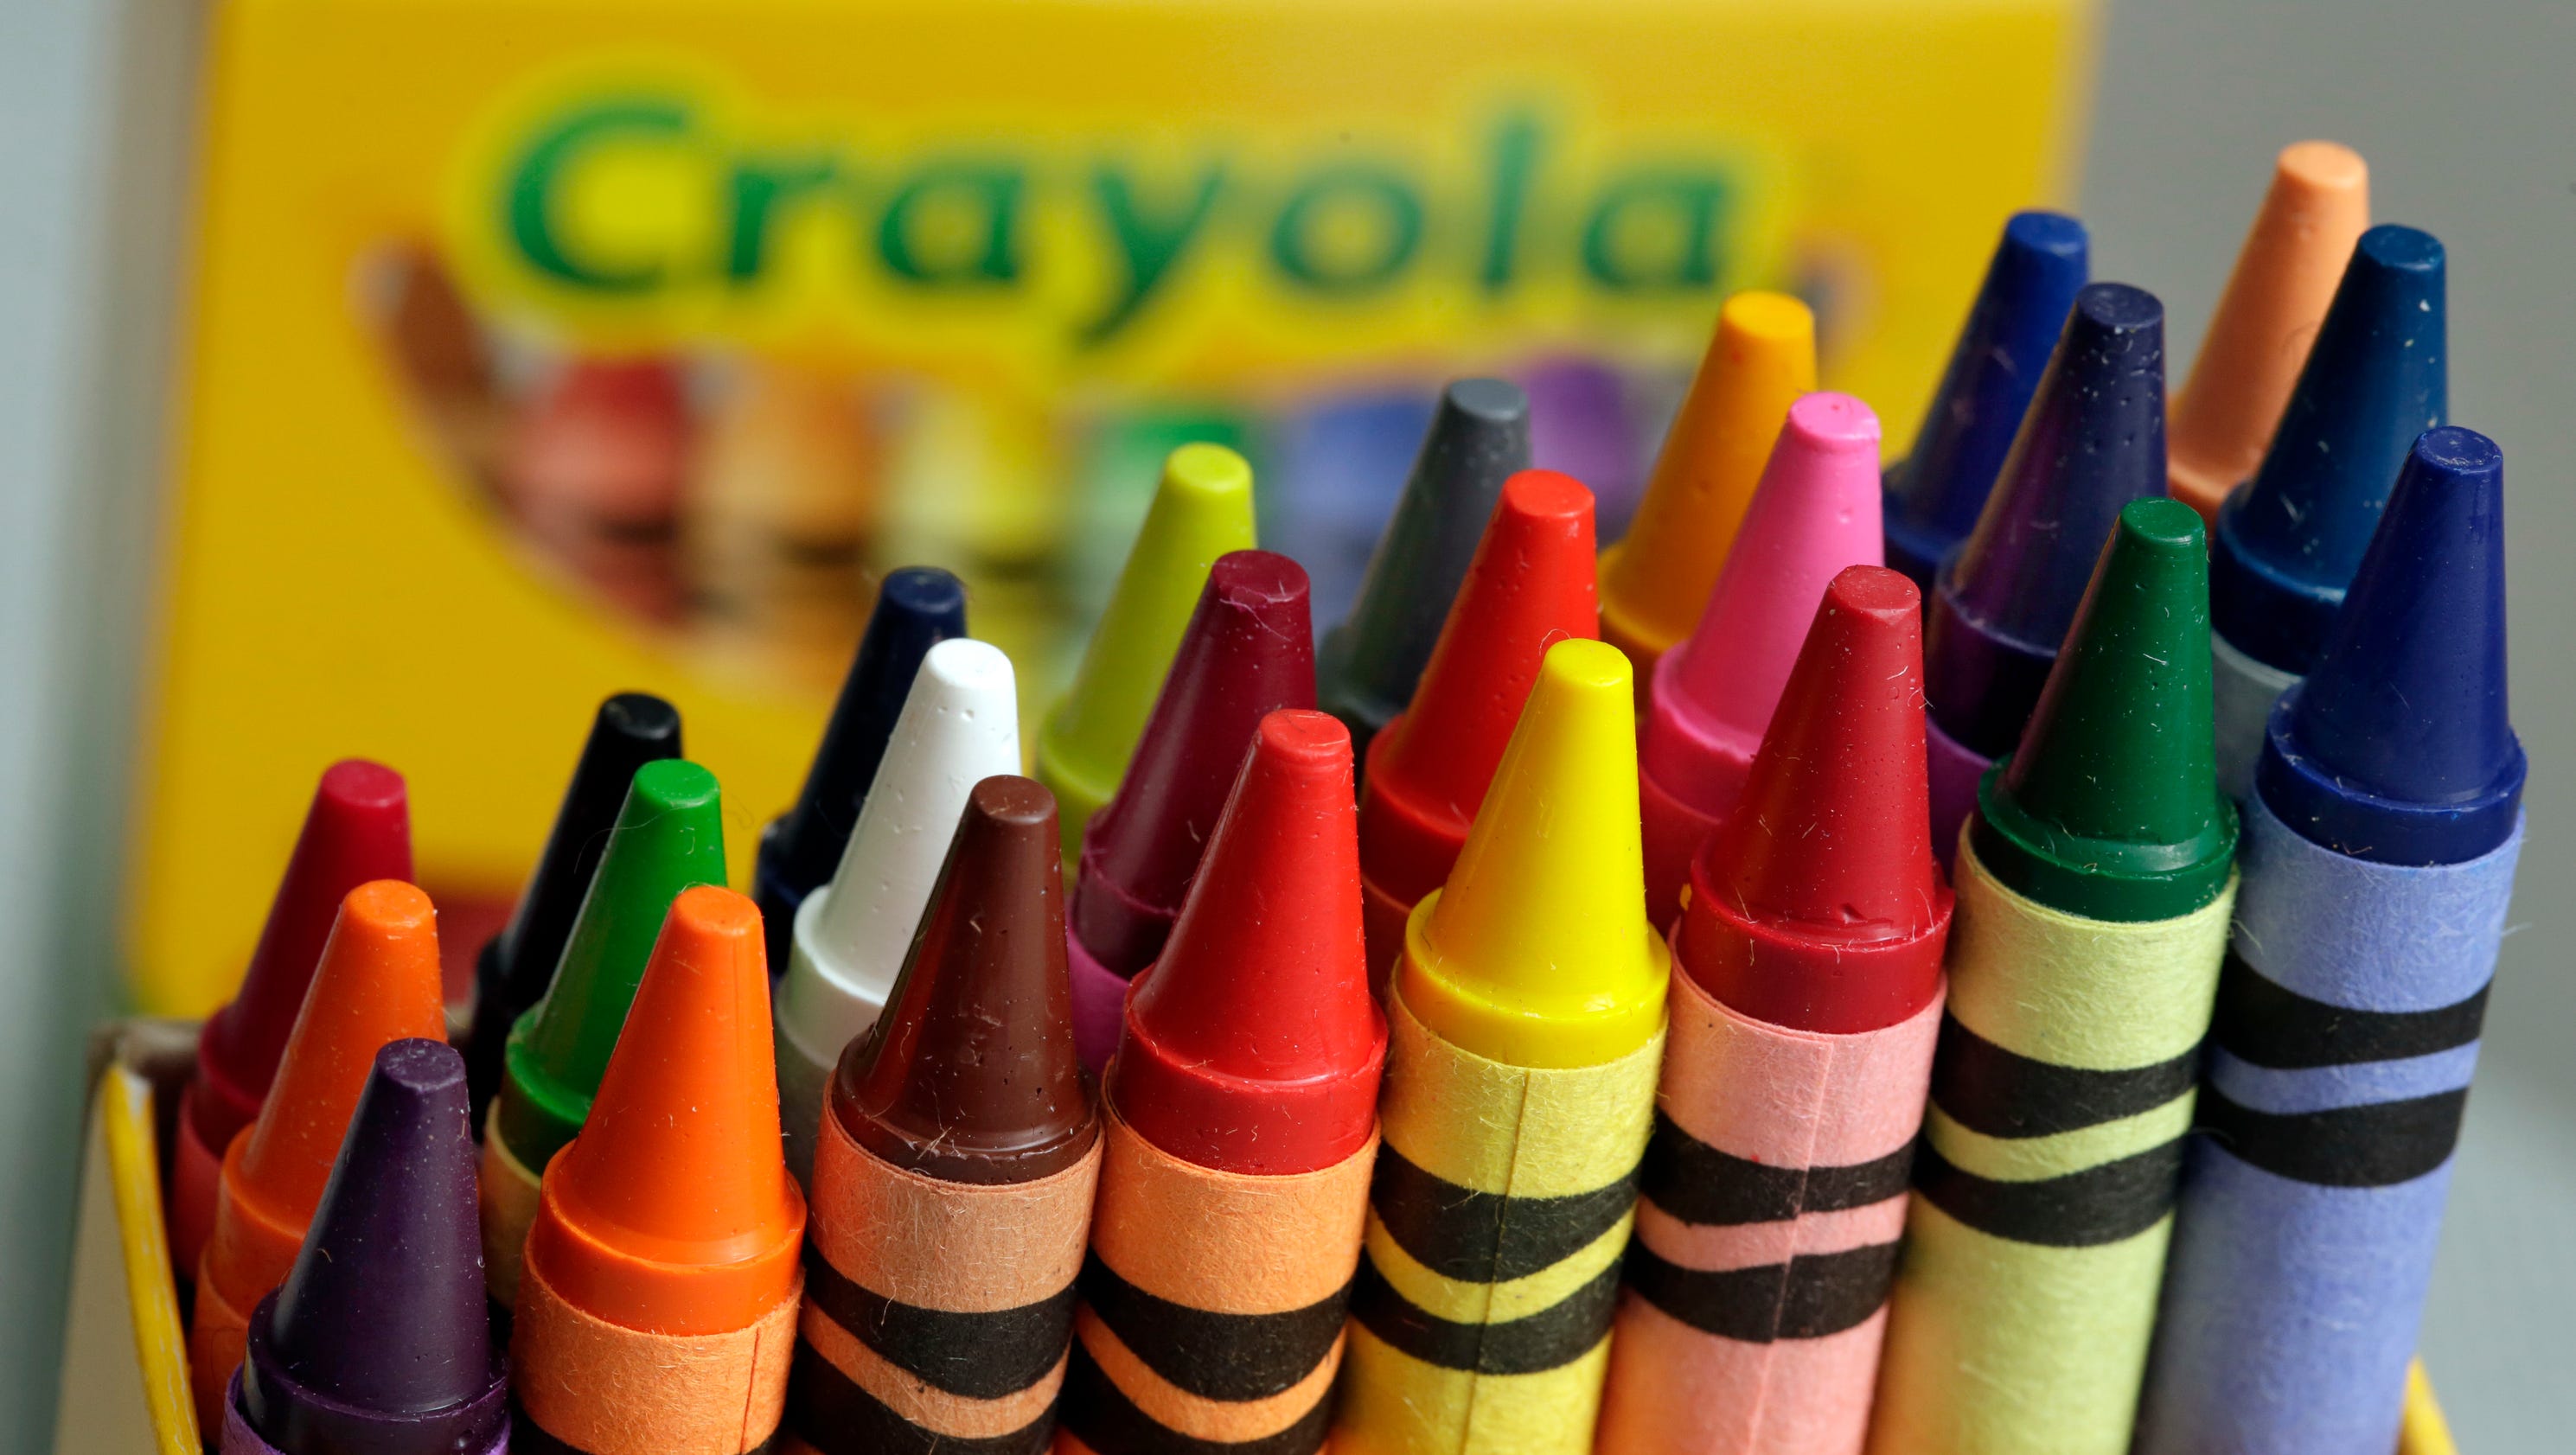 Crayola Reveals The Color Of Crayon It Is Retiring BEDECOR Free Coloring Picture wallpaper give a chance to color on the wall without getting in trouble! Fill the walls of your home or office with stress-relieving [bedroomdecorz.blogspot.com]